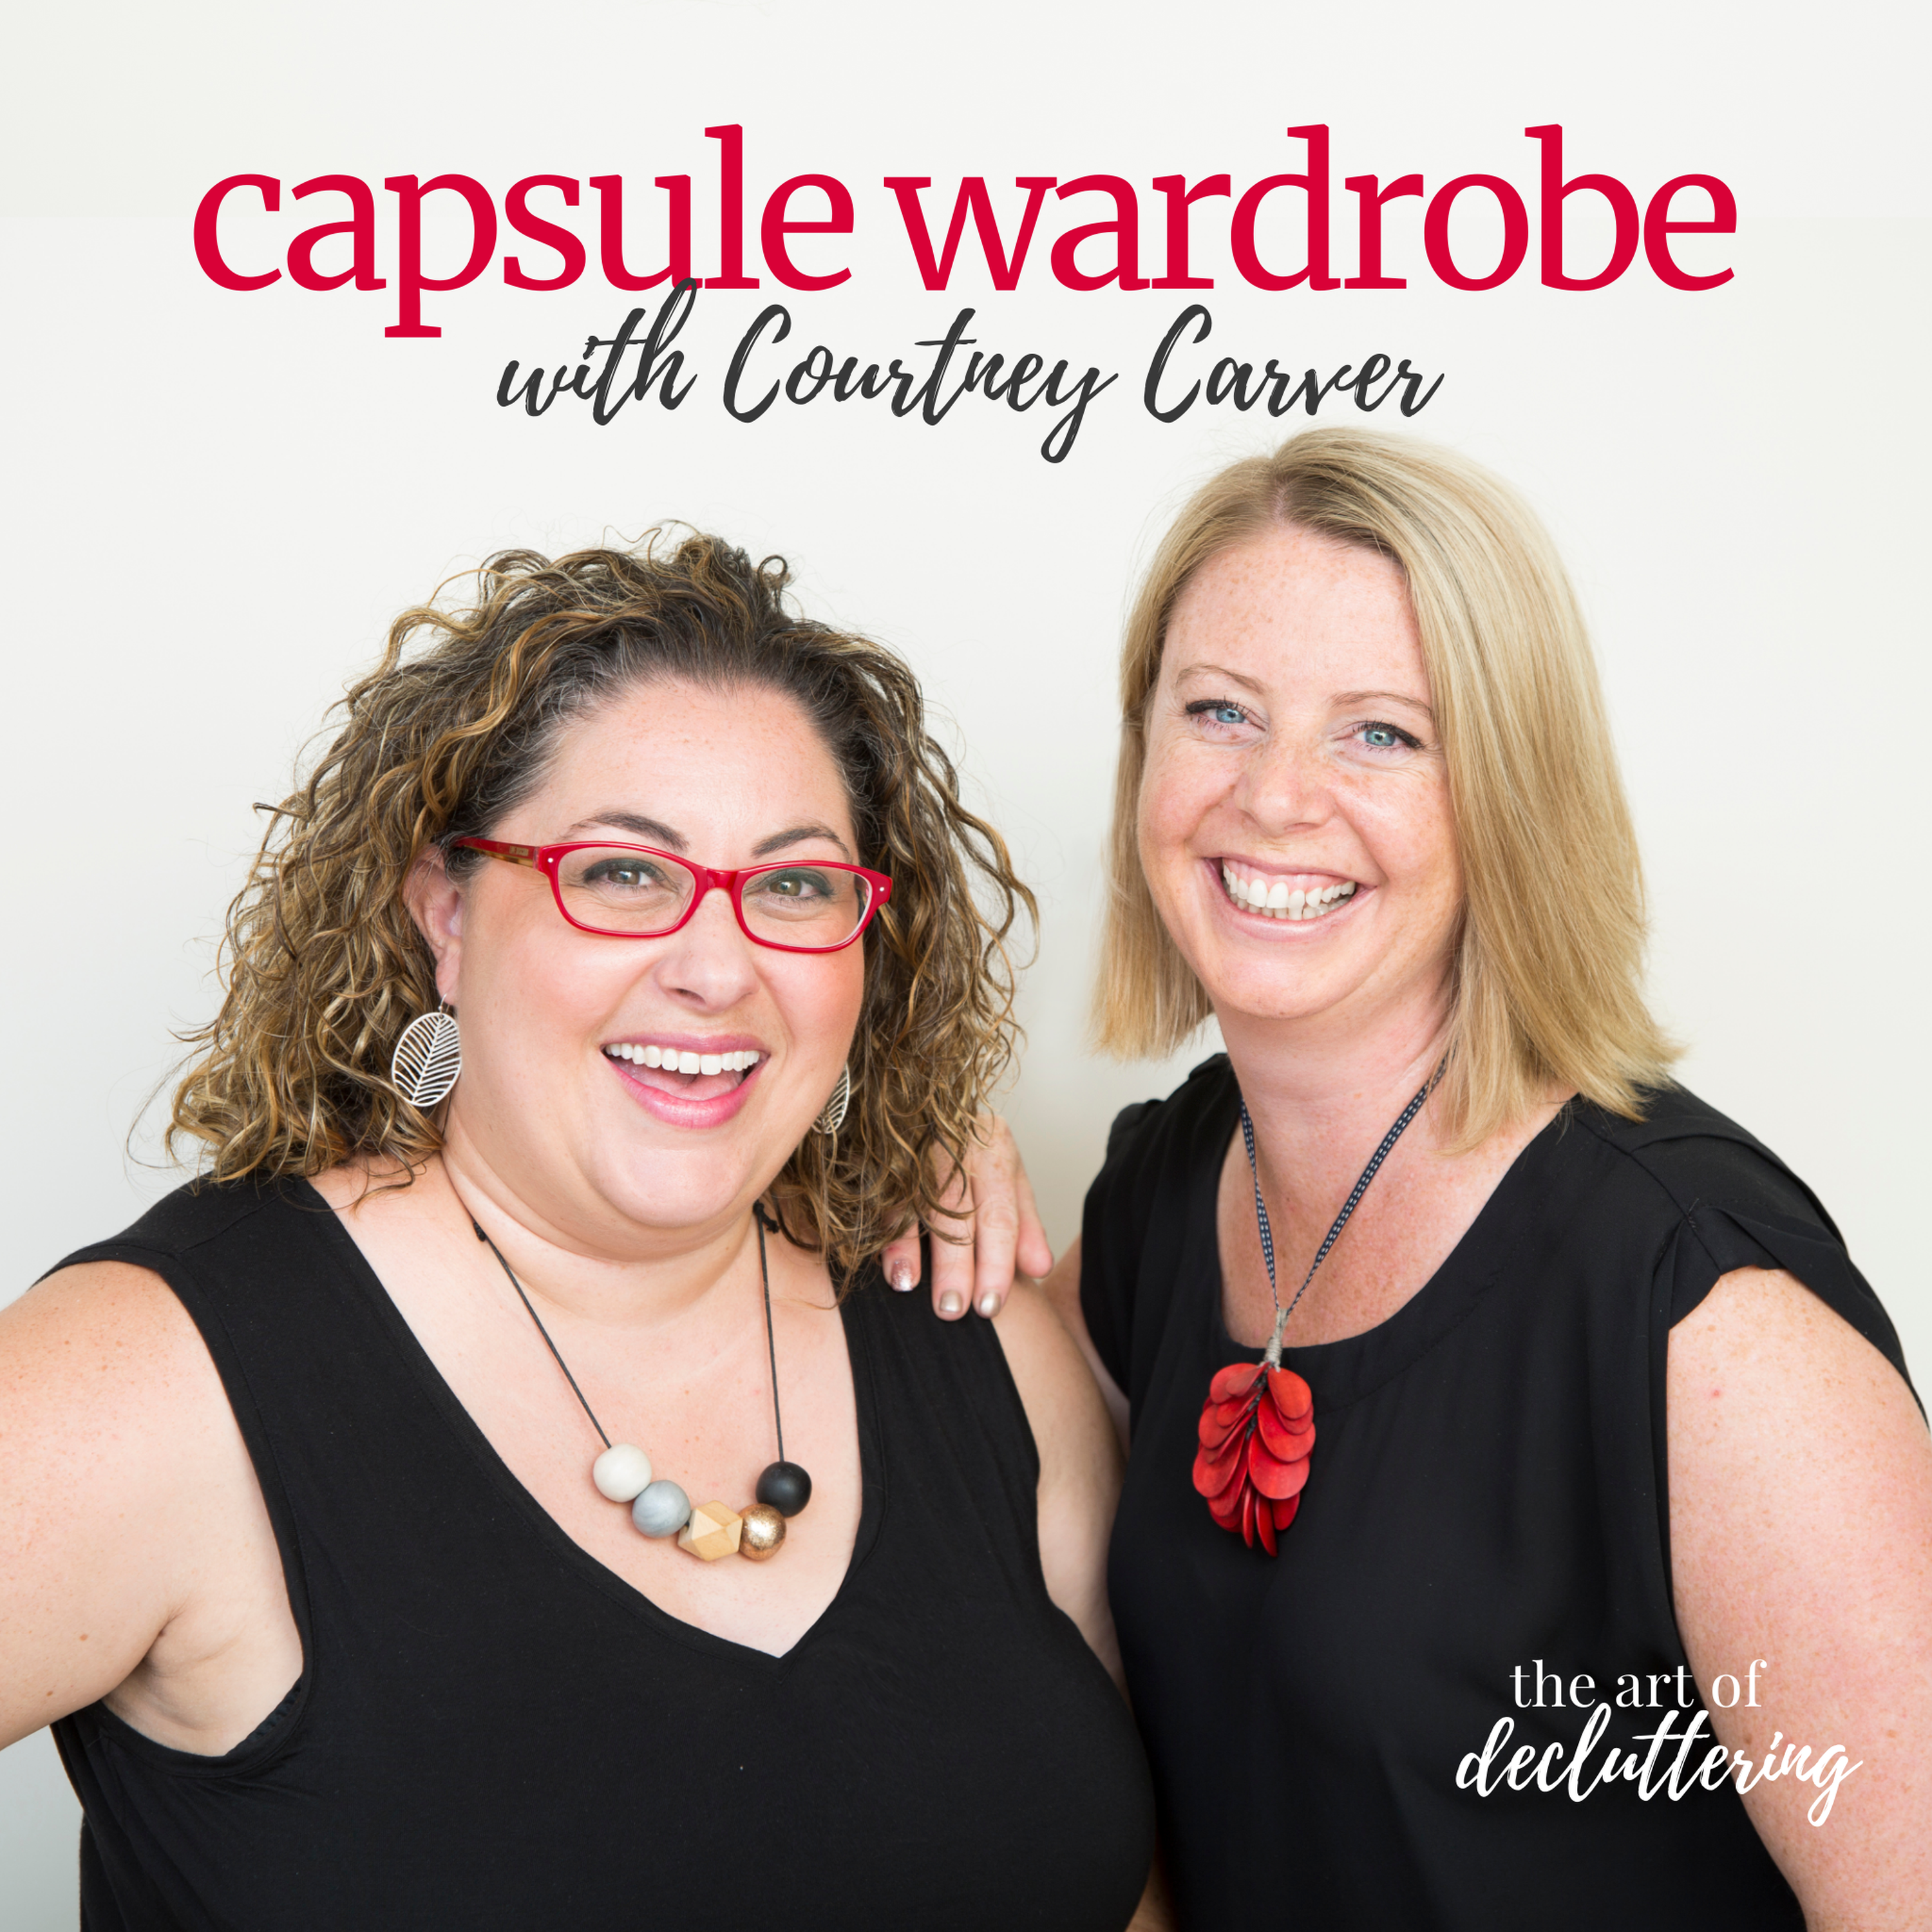 Capsule Wardrobe with Courtney Carver